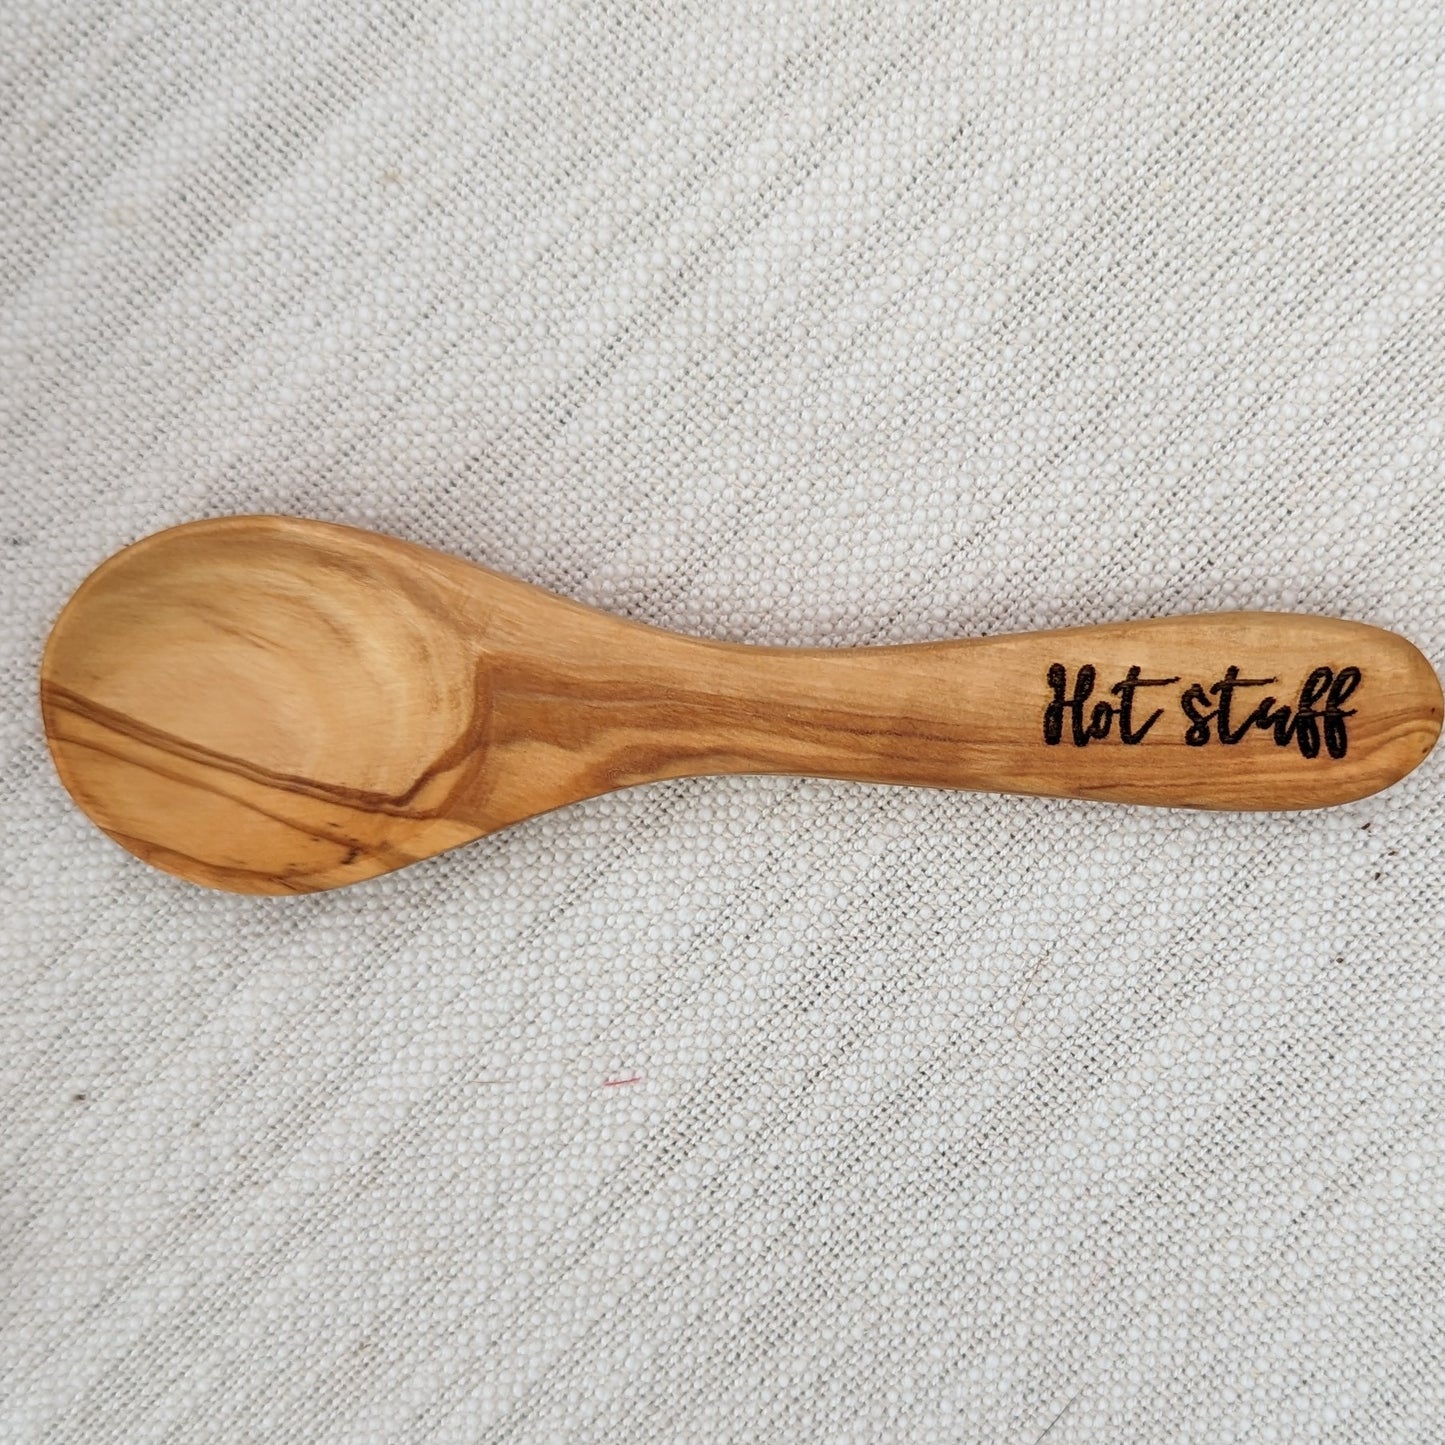 5" Olive Spoon